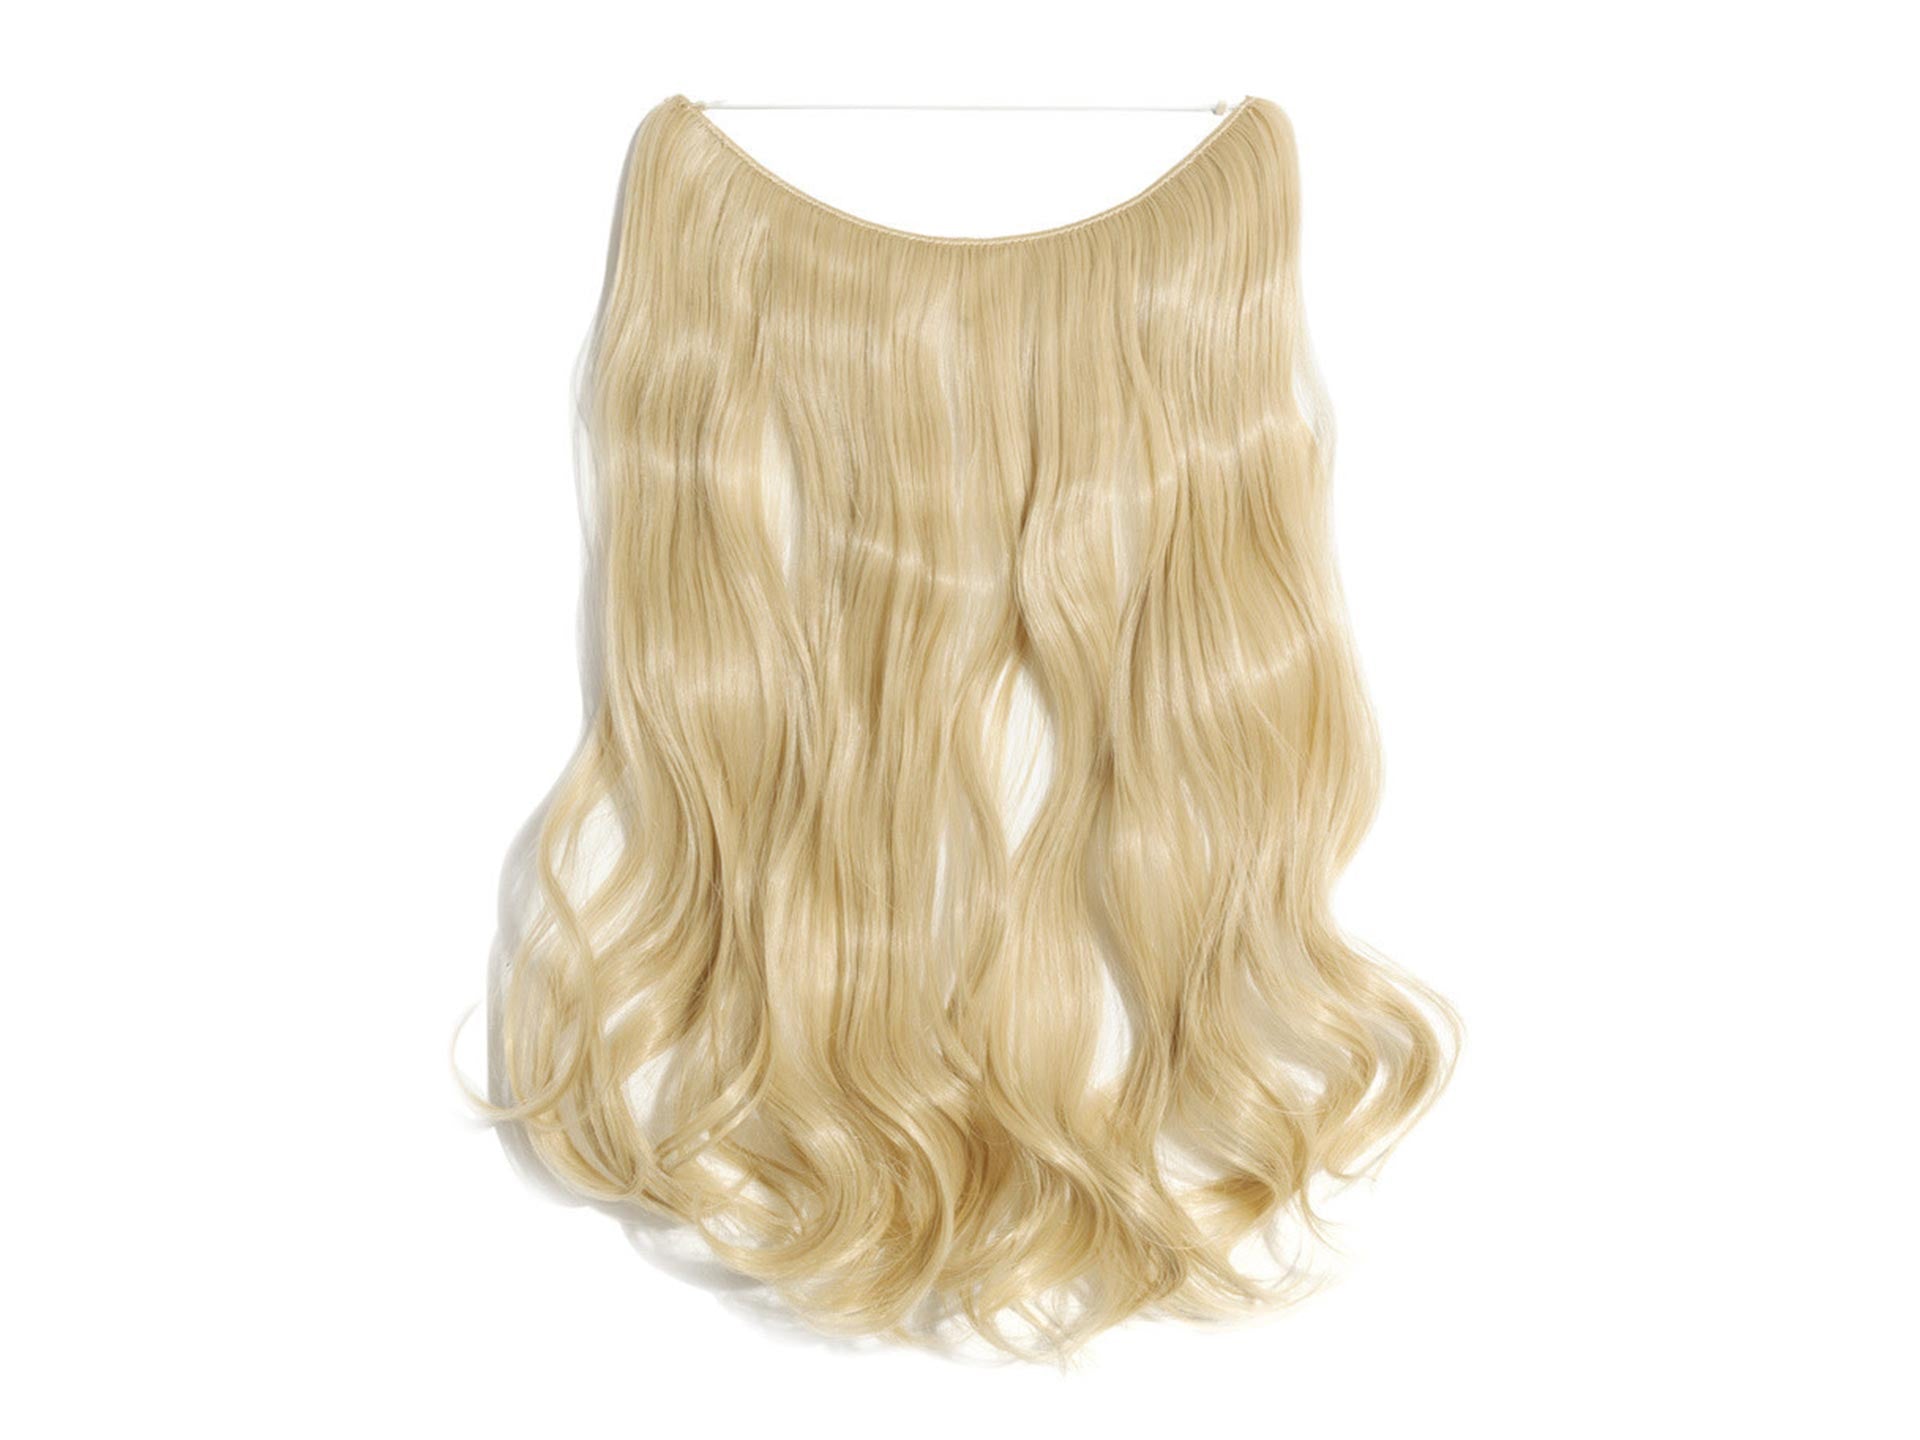 Blonde Halo Hair Extensions - wide 5